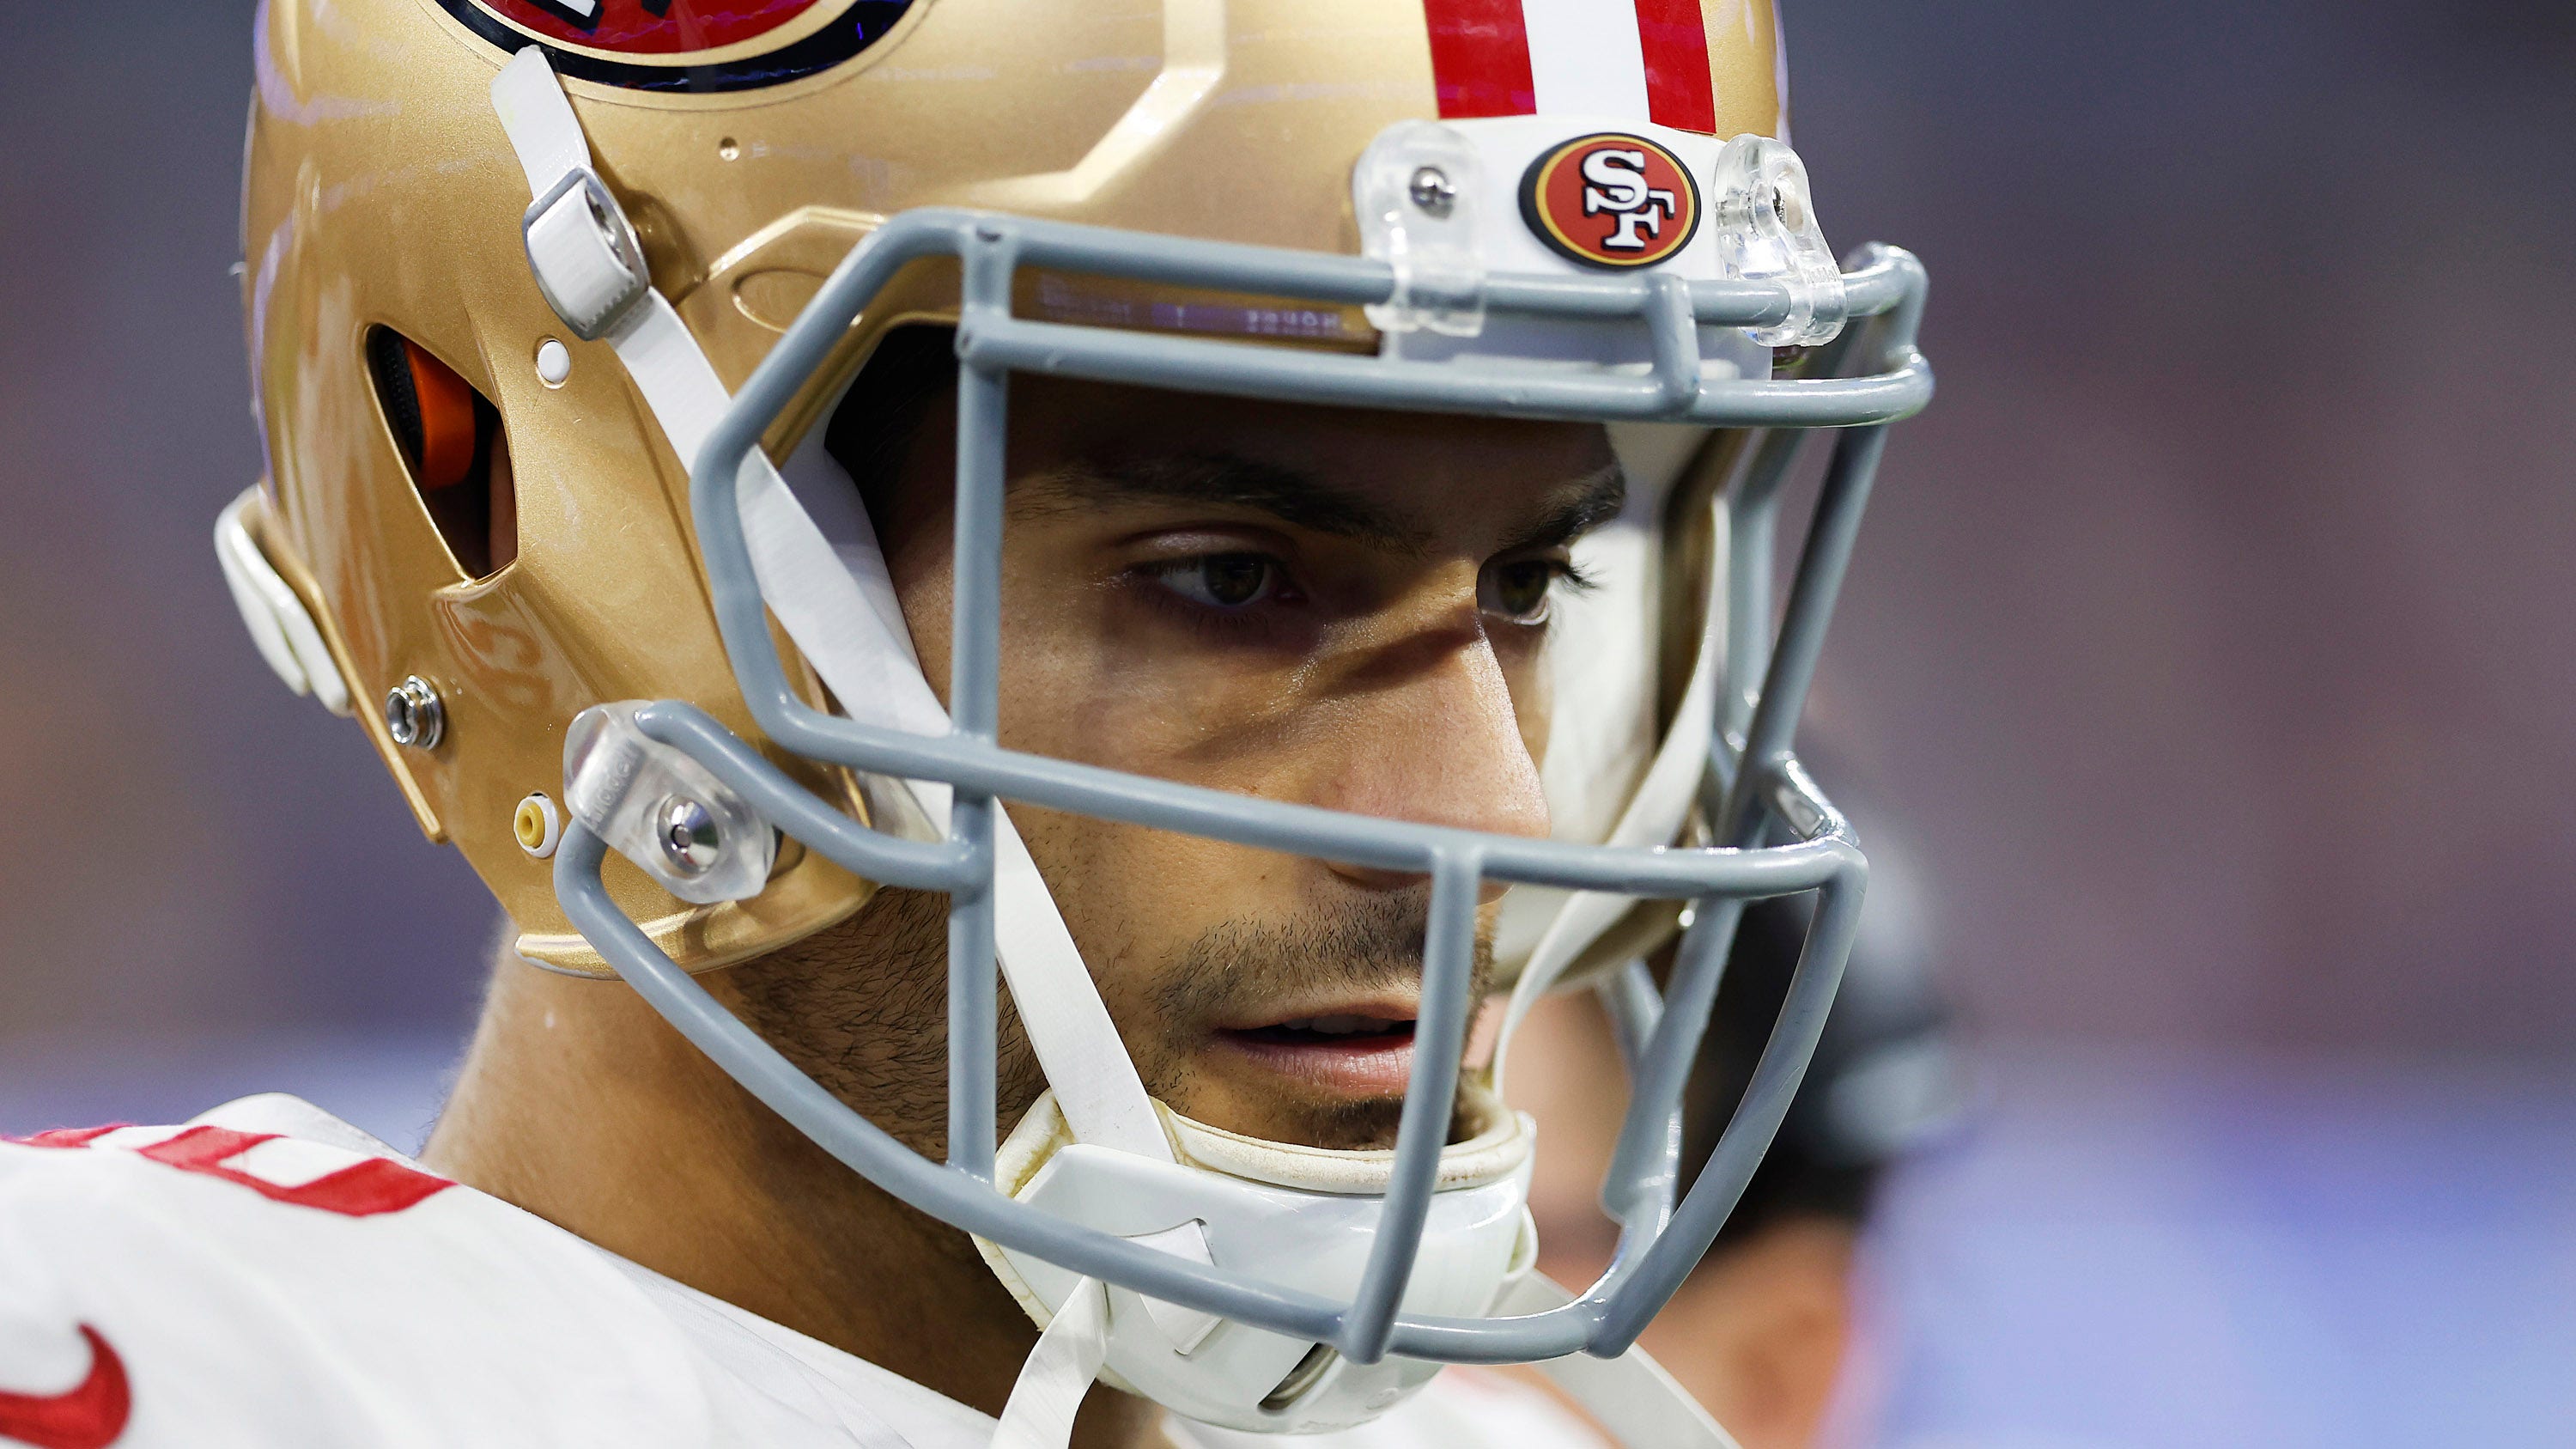 49ers’ Jimmy Garoppolo with future in question has ‘no regrets’ following NFC loss – Fox News